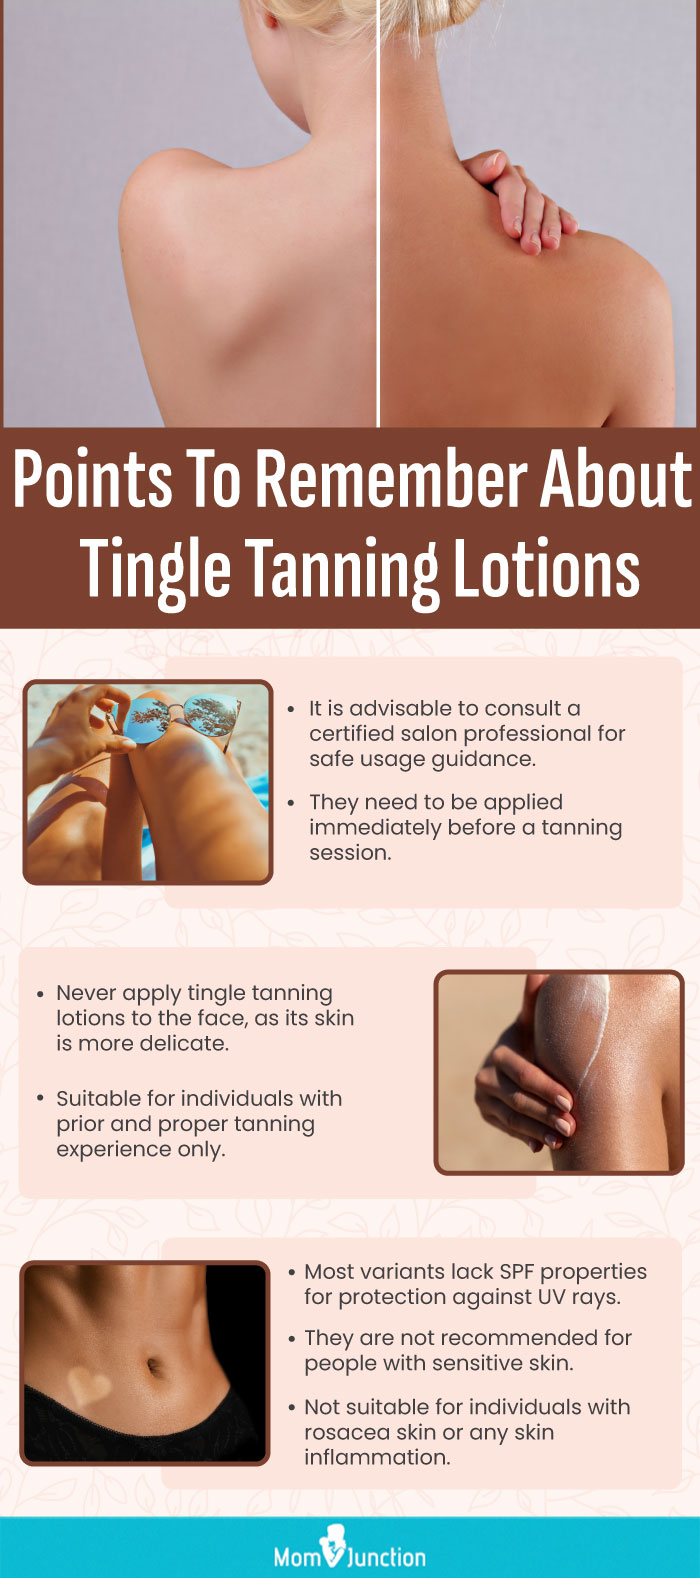 Points To Remember About Tingle Tanning Lotions (infographic)